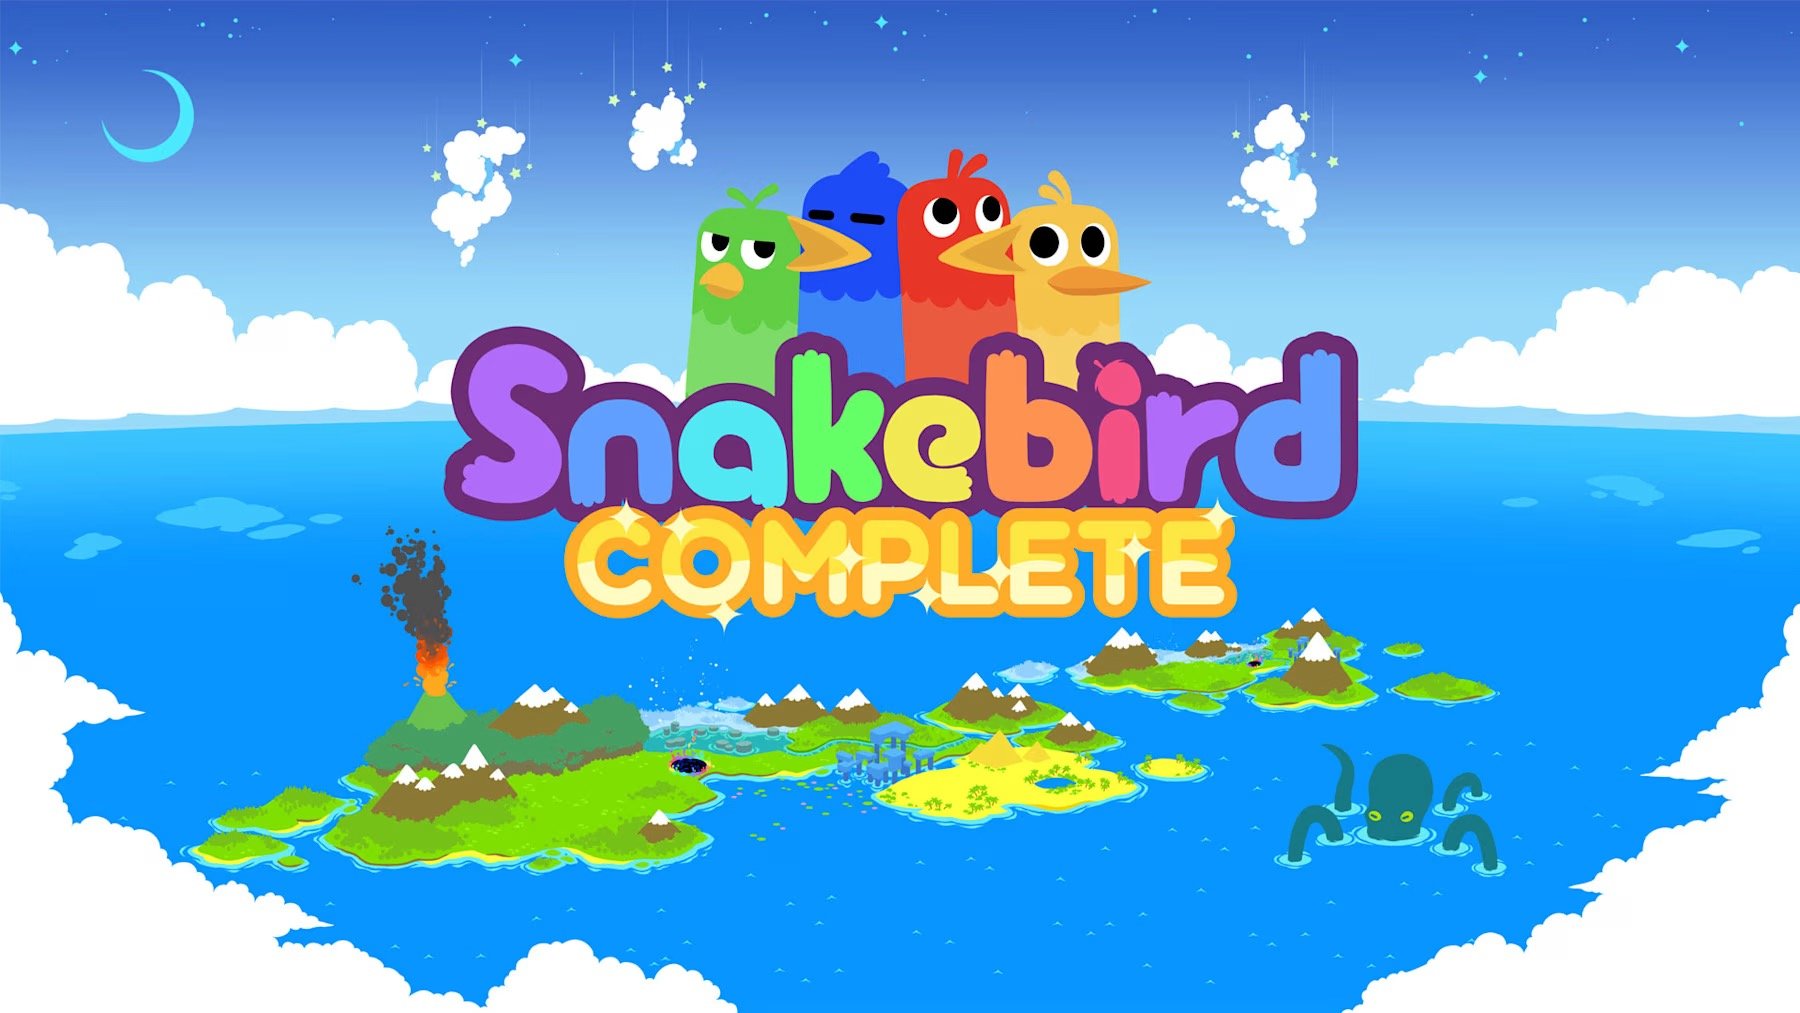 Reviews Featuring ‘Snakebird Complete’, Plus Today’s New Releases and Sales – TouchArcade